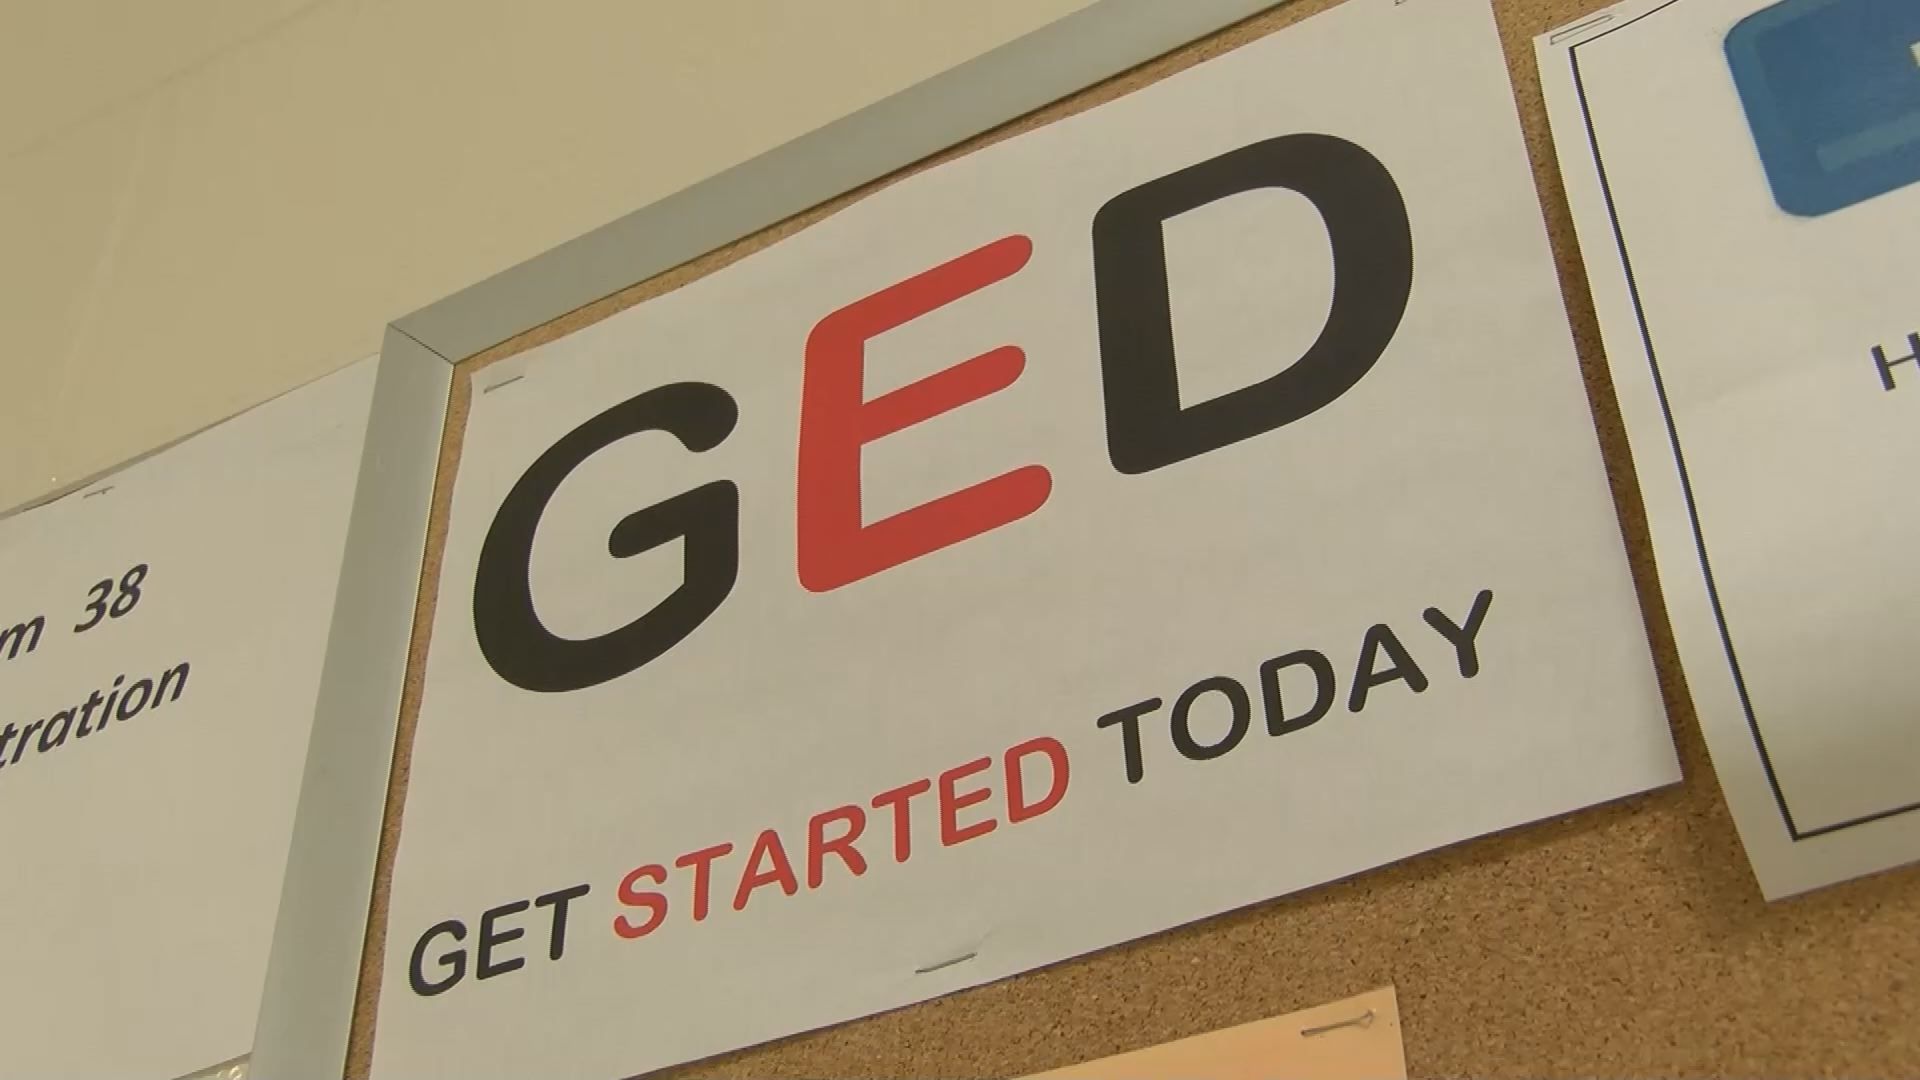 FREE GED CLASSES